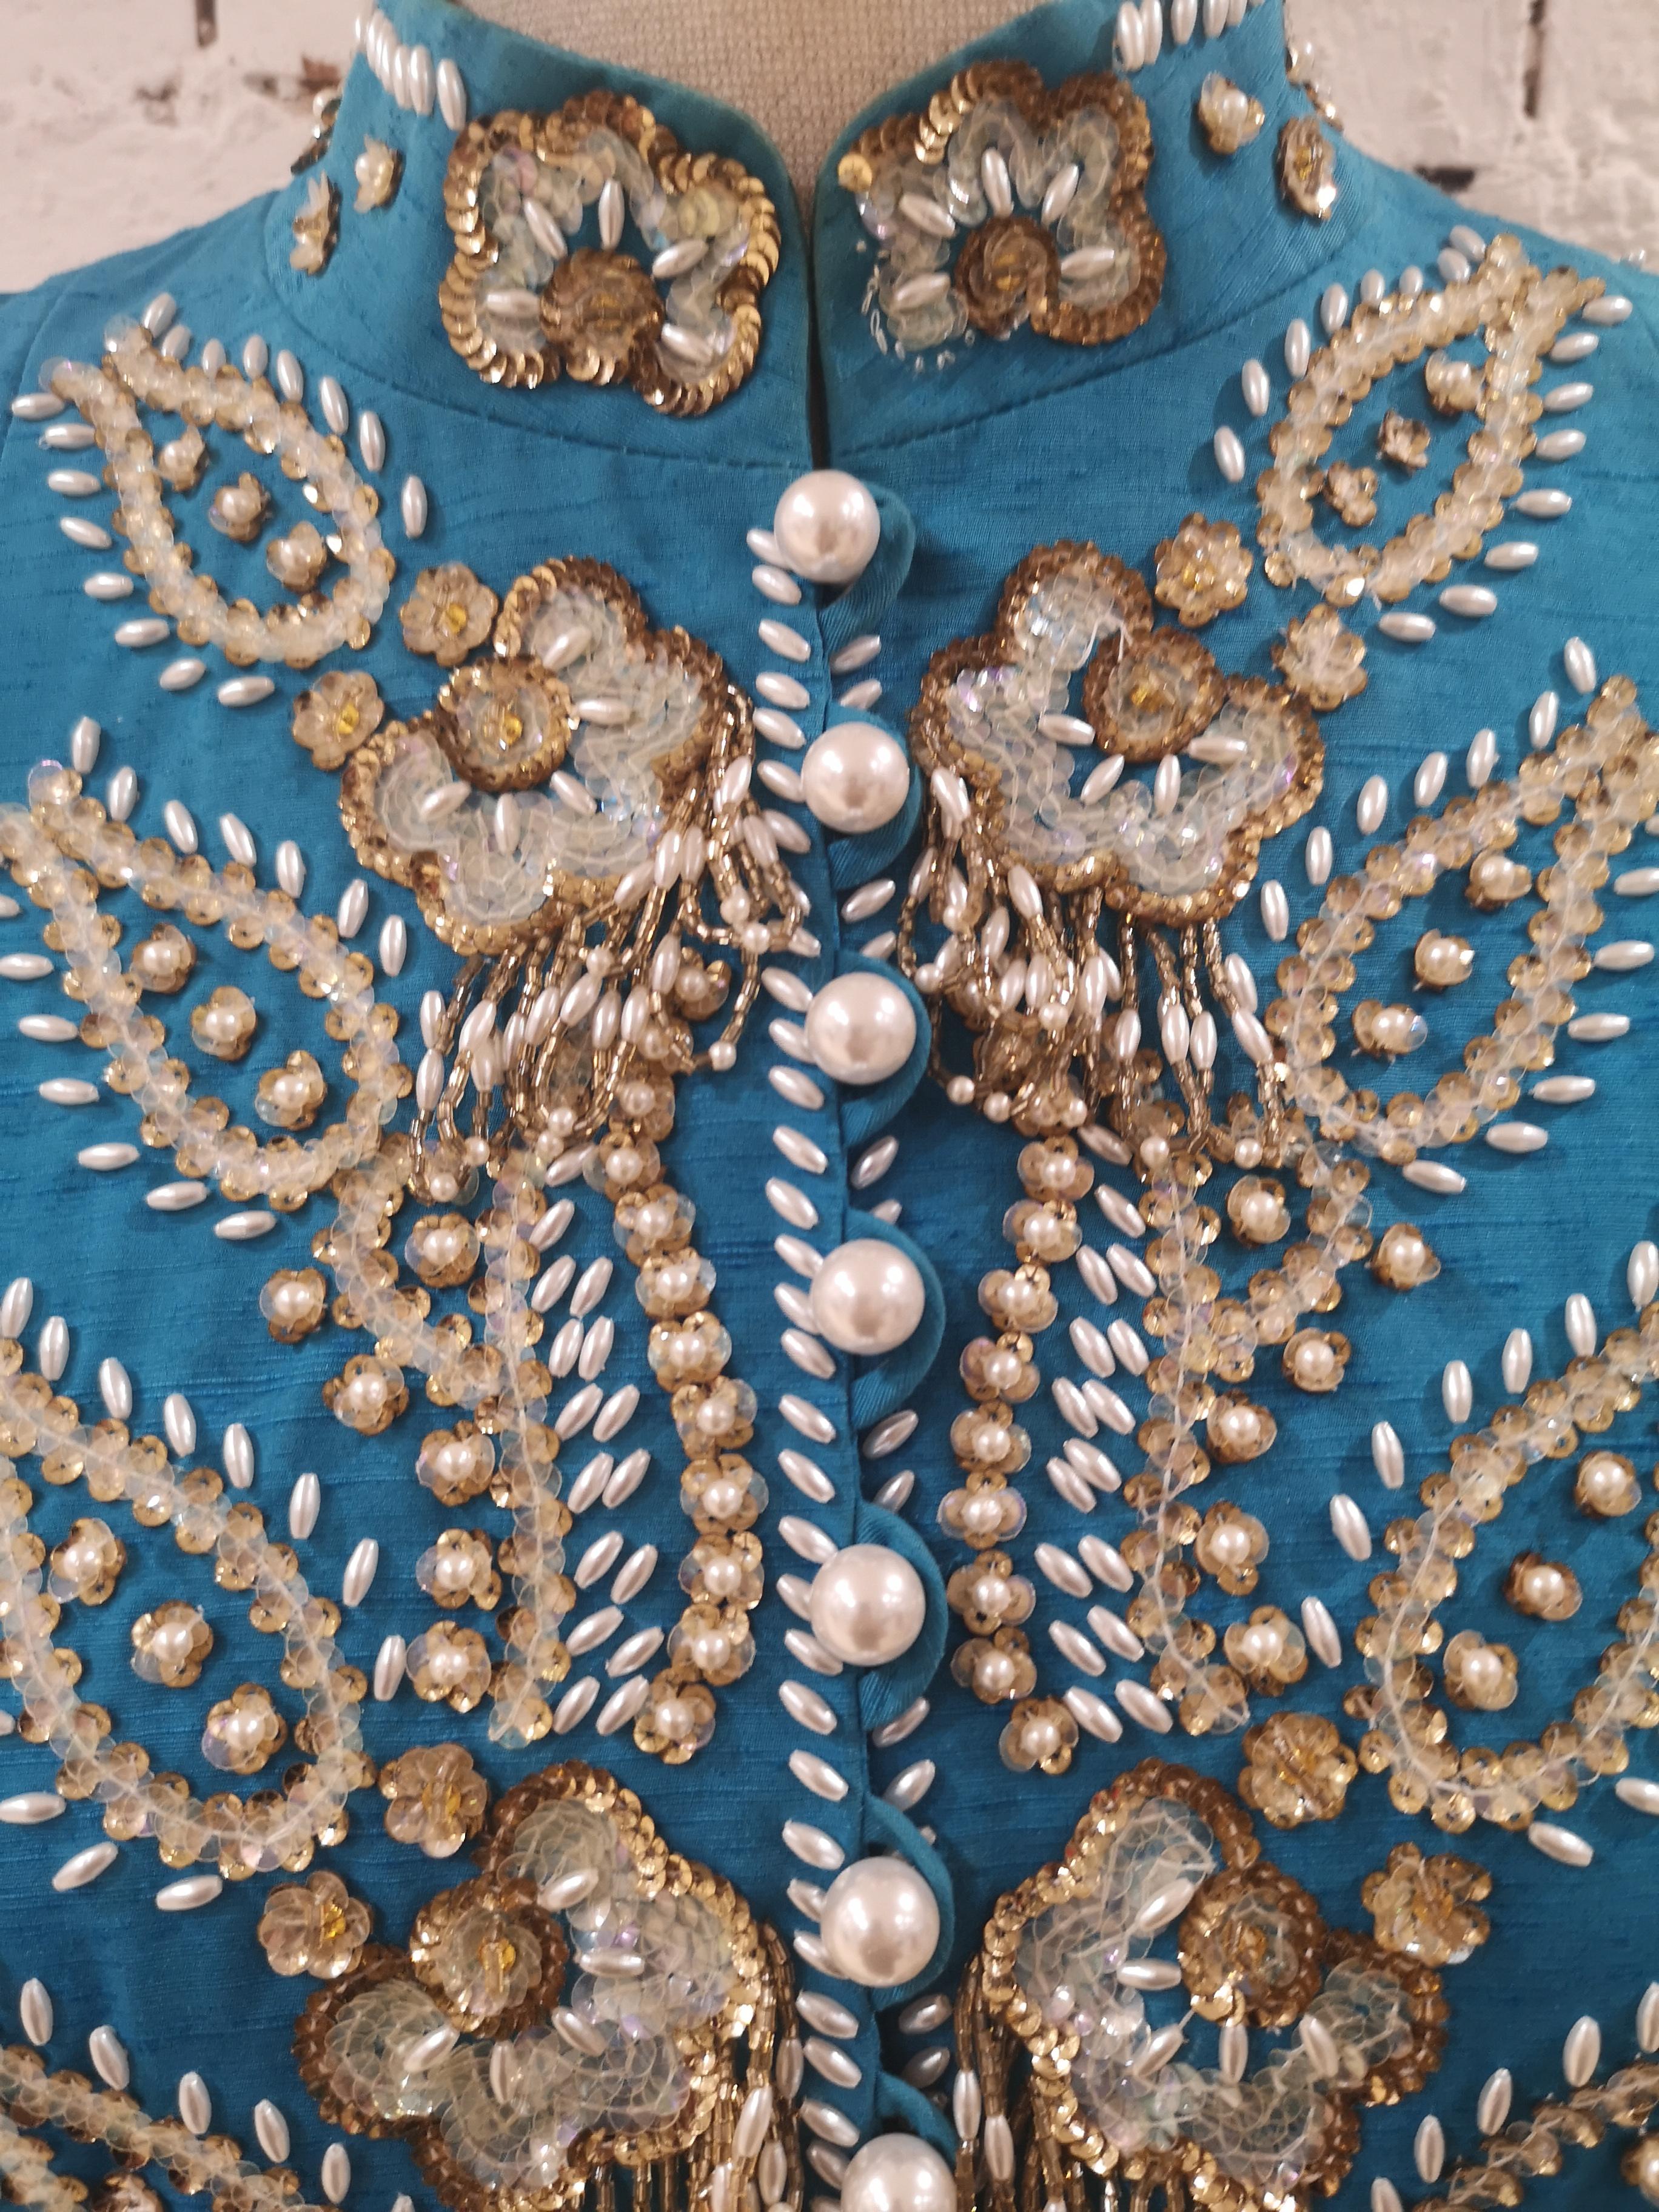 Blue Christian Dior turquoise pearls beads sequins jacket